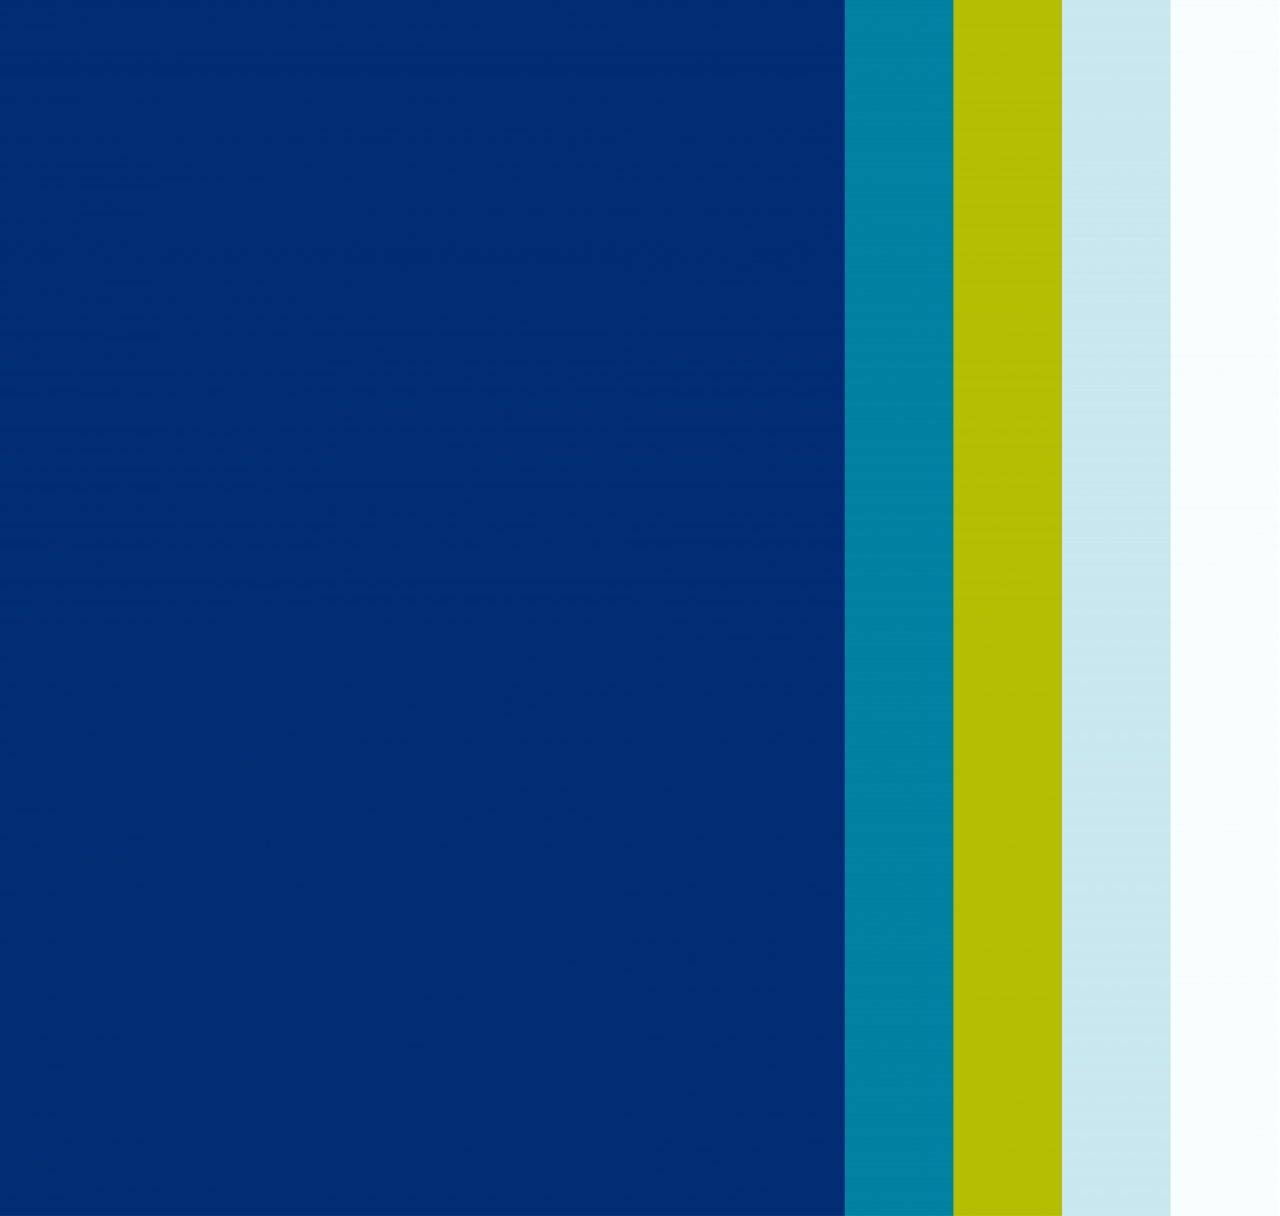 Navy background with teal, lime green, sky blue and white vertical lines at far right side of page.